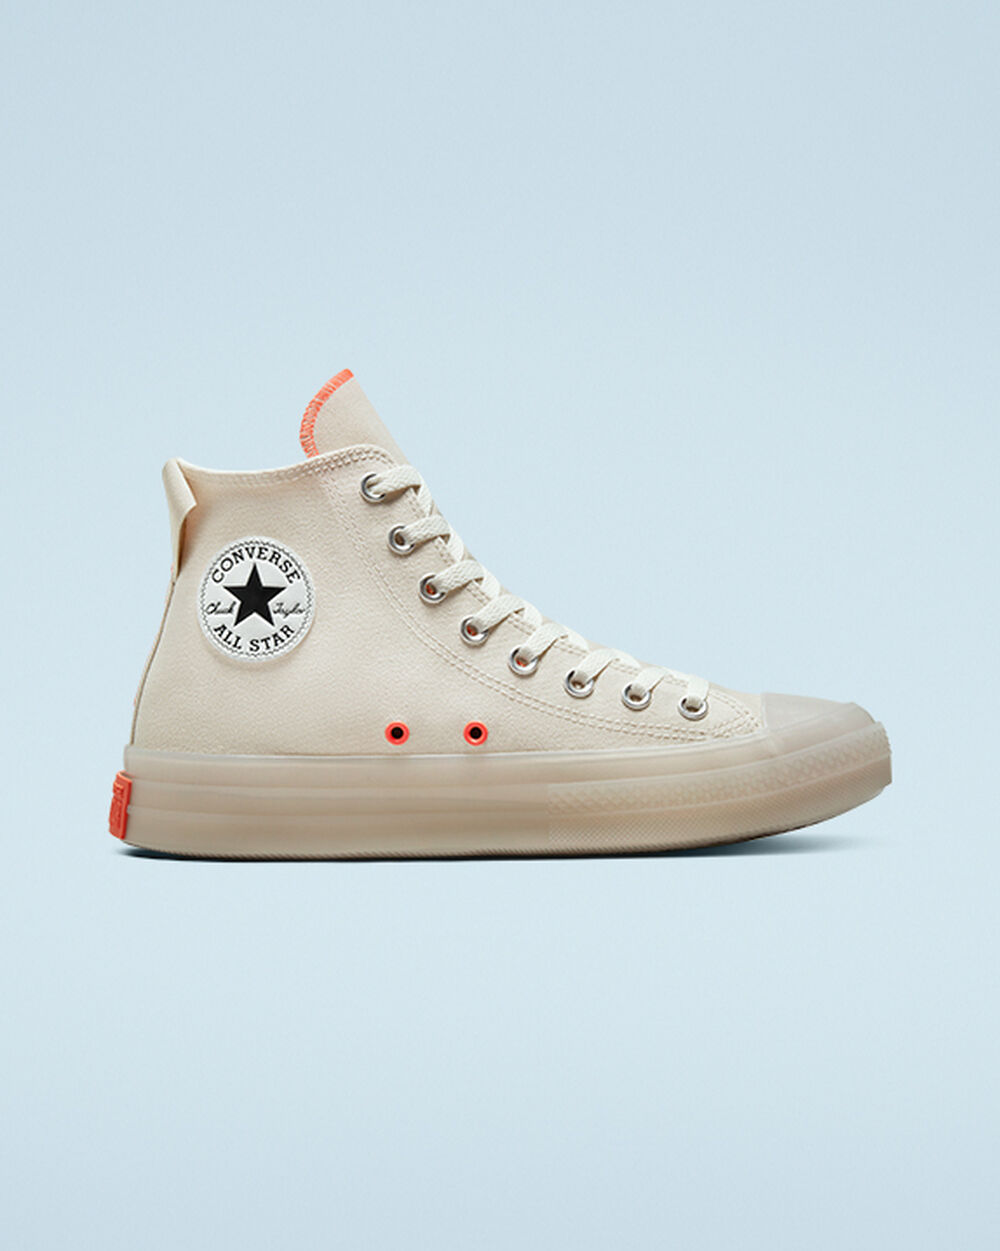 Tenis Converse Chuck Taylor All Star CX Mujer Beige Mango | Mexico-364276